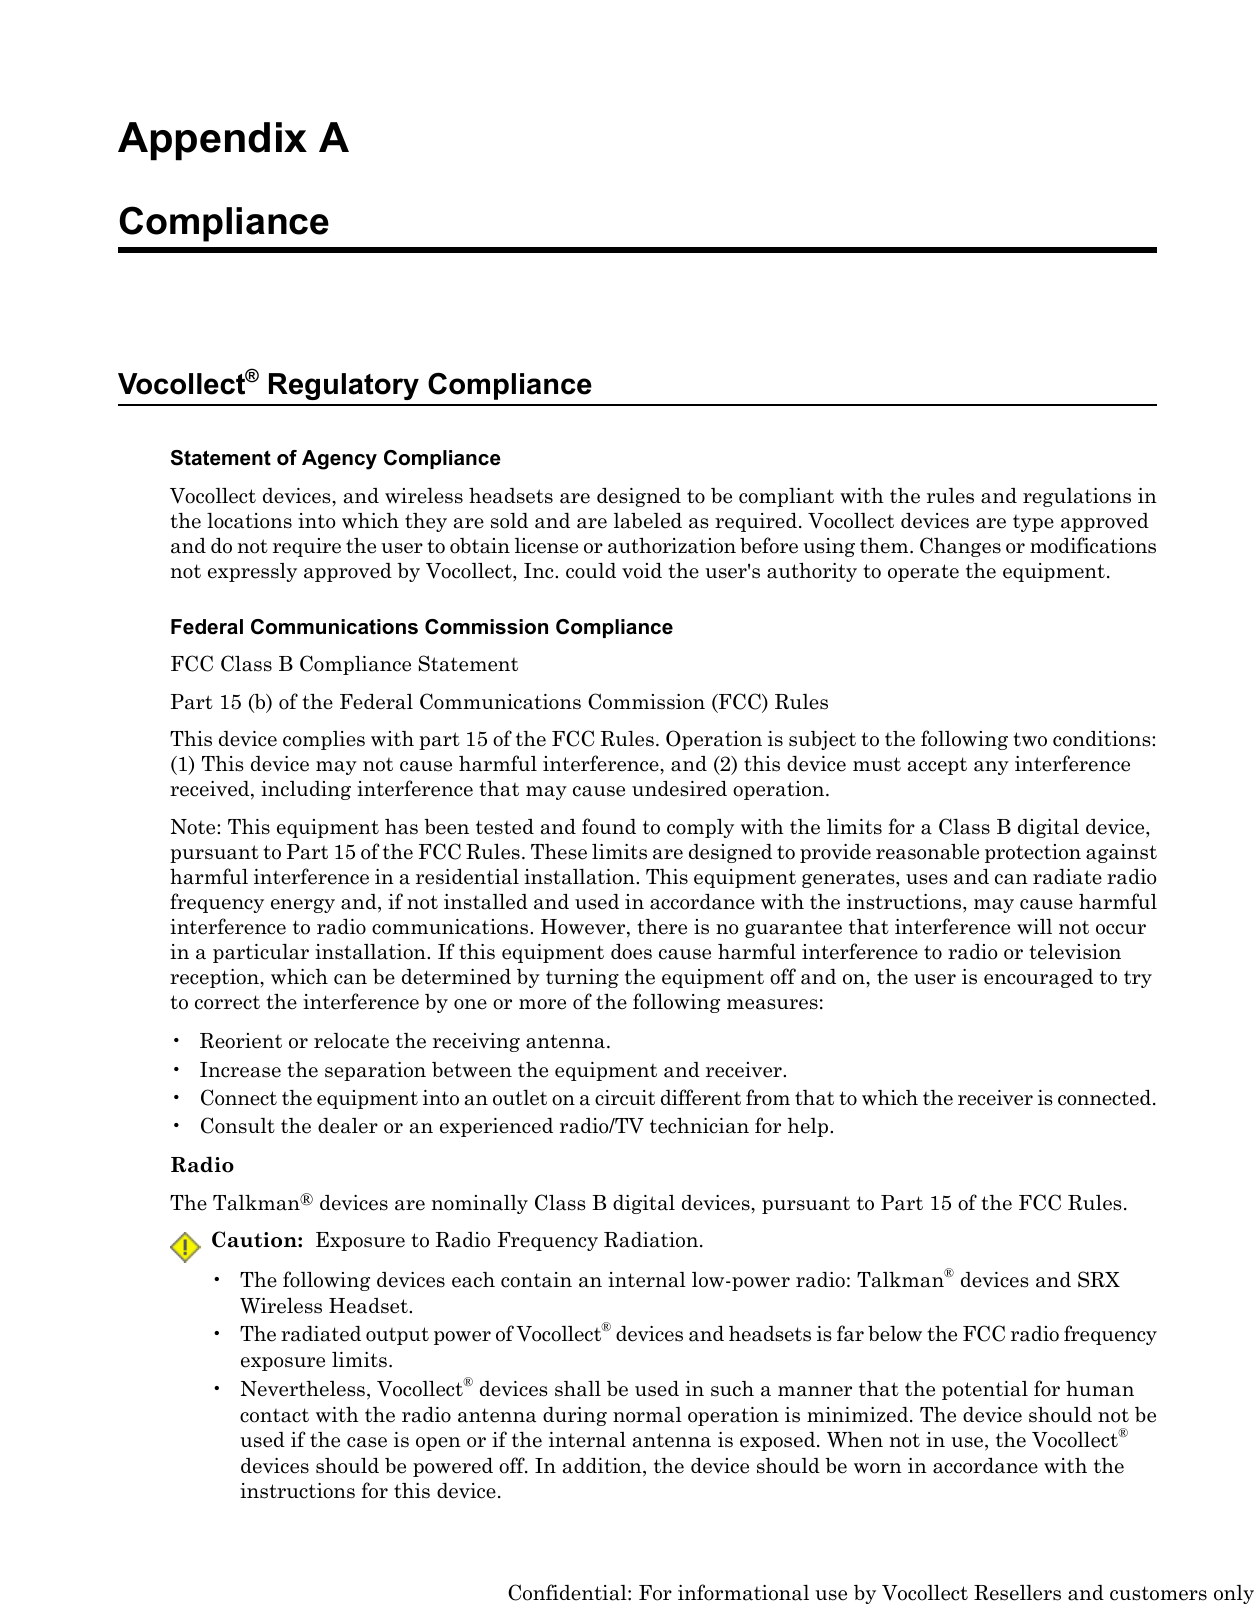 Appendix AComplianceVocollect®Regulatory ComplianceStatement of Agency ComplianceVocollect devices, and wireless headsets are designed to be compliant with the rules and regulations inthe locations into which they are sold and are labeled as required. Vocollect devices are type approvedand do not require the user to obtain license or authorization before using them. Changes or modificationsnot expressly approved by Vocollect, Inc. could void the user&apos;s authority to operate the equipment.Federal Communications Commission ComplianceFCC Class B Compliance StatementPart 15 (b) of the Federal Communications Commission (FCC) RulesThis device complies with part 15 of the FCC Rules. Operation is subject to the following two conditions:(1) This device may not cause harmful interference, and (2) this device must accept any interferencereceived, including interference that may cause undesired operation.Note: This equipment has been tested and found to comply with the limits for a Class B digital device,pursuant to Part 15 of the FCC Rules. These limits are designed to provide reasonable protection againstharmful interference in a residential installation. This equipment generates, uses and can radiate radiofrequency energy and, if not installed and used in accordance with the instructions, may cause harmfulinterference to radio communications. However, there is no guarantee that interference will not occurin a particular installation. If this equipment does cause harmful interference to radio or televisionreception, which can be determined by turning the equipment off and on, the user is encouraged to tryto correct the interference by one or more of the following measures:• Reorient or relocate the receiving antenna.• Increase the separation between the equipment and receiver.•Connect the equipment into an outlet on a circuit different from that to which the receiver is connected.• Consult the dealer or an experienced radio/TV technician for help.RadioThe Talkman®devices are nominally Class B digital devices, pursuant to Part 15 of the FCC Rules.Caution: Exposure to Radio Frequency Radiation.• The following devices each contain an internal low-power radio: Talkman®devices and SRXWireless Headset.•The radiated output power of Vocollect®devices and headsets is far below the FCC radio frequencyexposure limits.• Nevertheless, Vocollect®devices shall be used in such a manner that the potential for humancontact with the radio antenna during normal operation is minimized. The device should not beused if the case is open or if the internal antenna is exposed. When not in use, the Vocollect®devices should be powered off. In addition, the device should be worn in accordance with theinstructions for this device.Confidential: For informational use by Vocollect Resellers and customers only